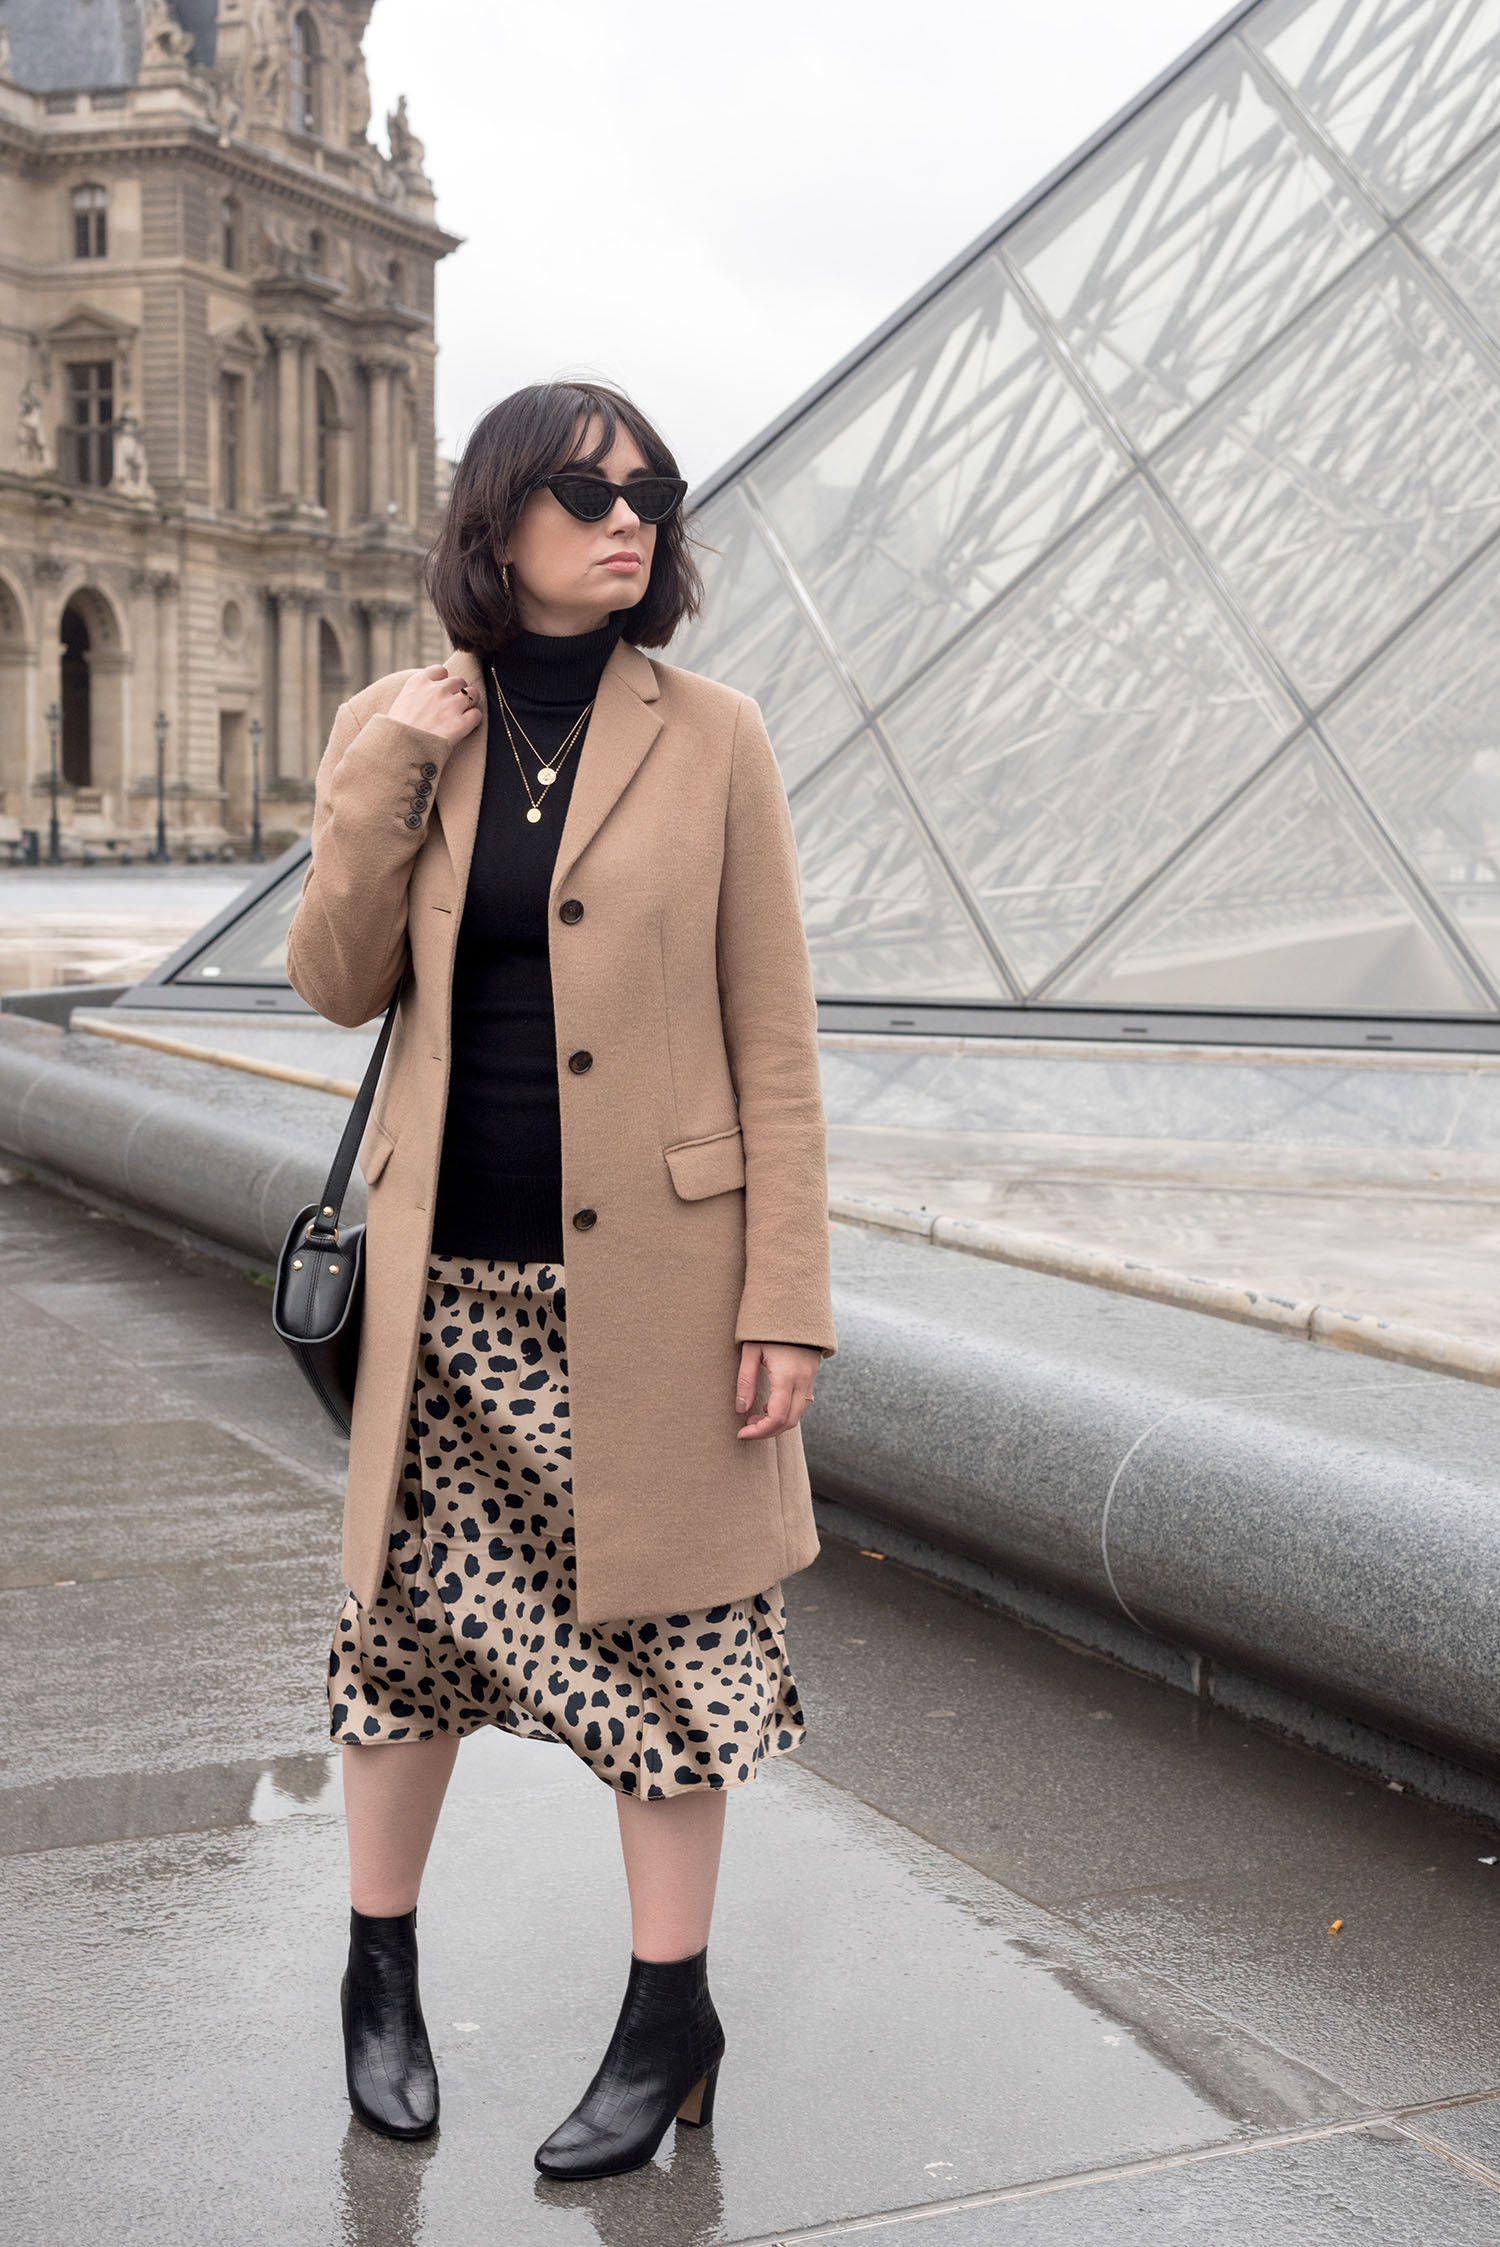 Top Canadian fashion blogger Cee Fardoe of Coco & Vera stands outside the Louvre museum in Paris, wearing a Realisation Par... leopard skirt and Minelli ankle boots